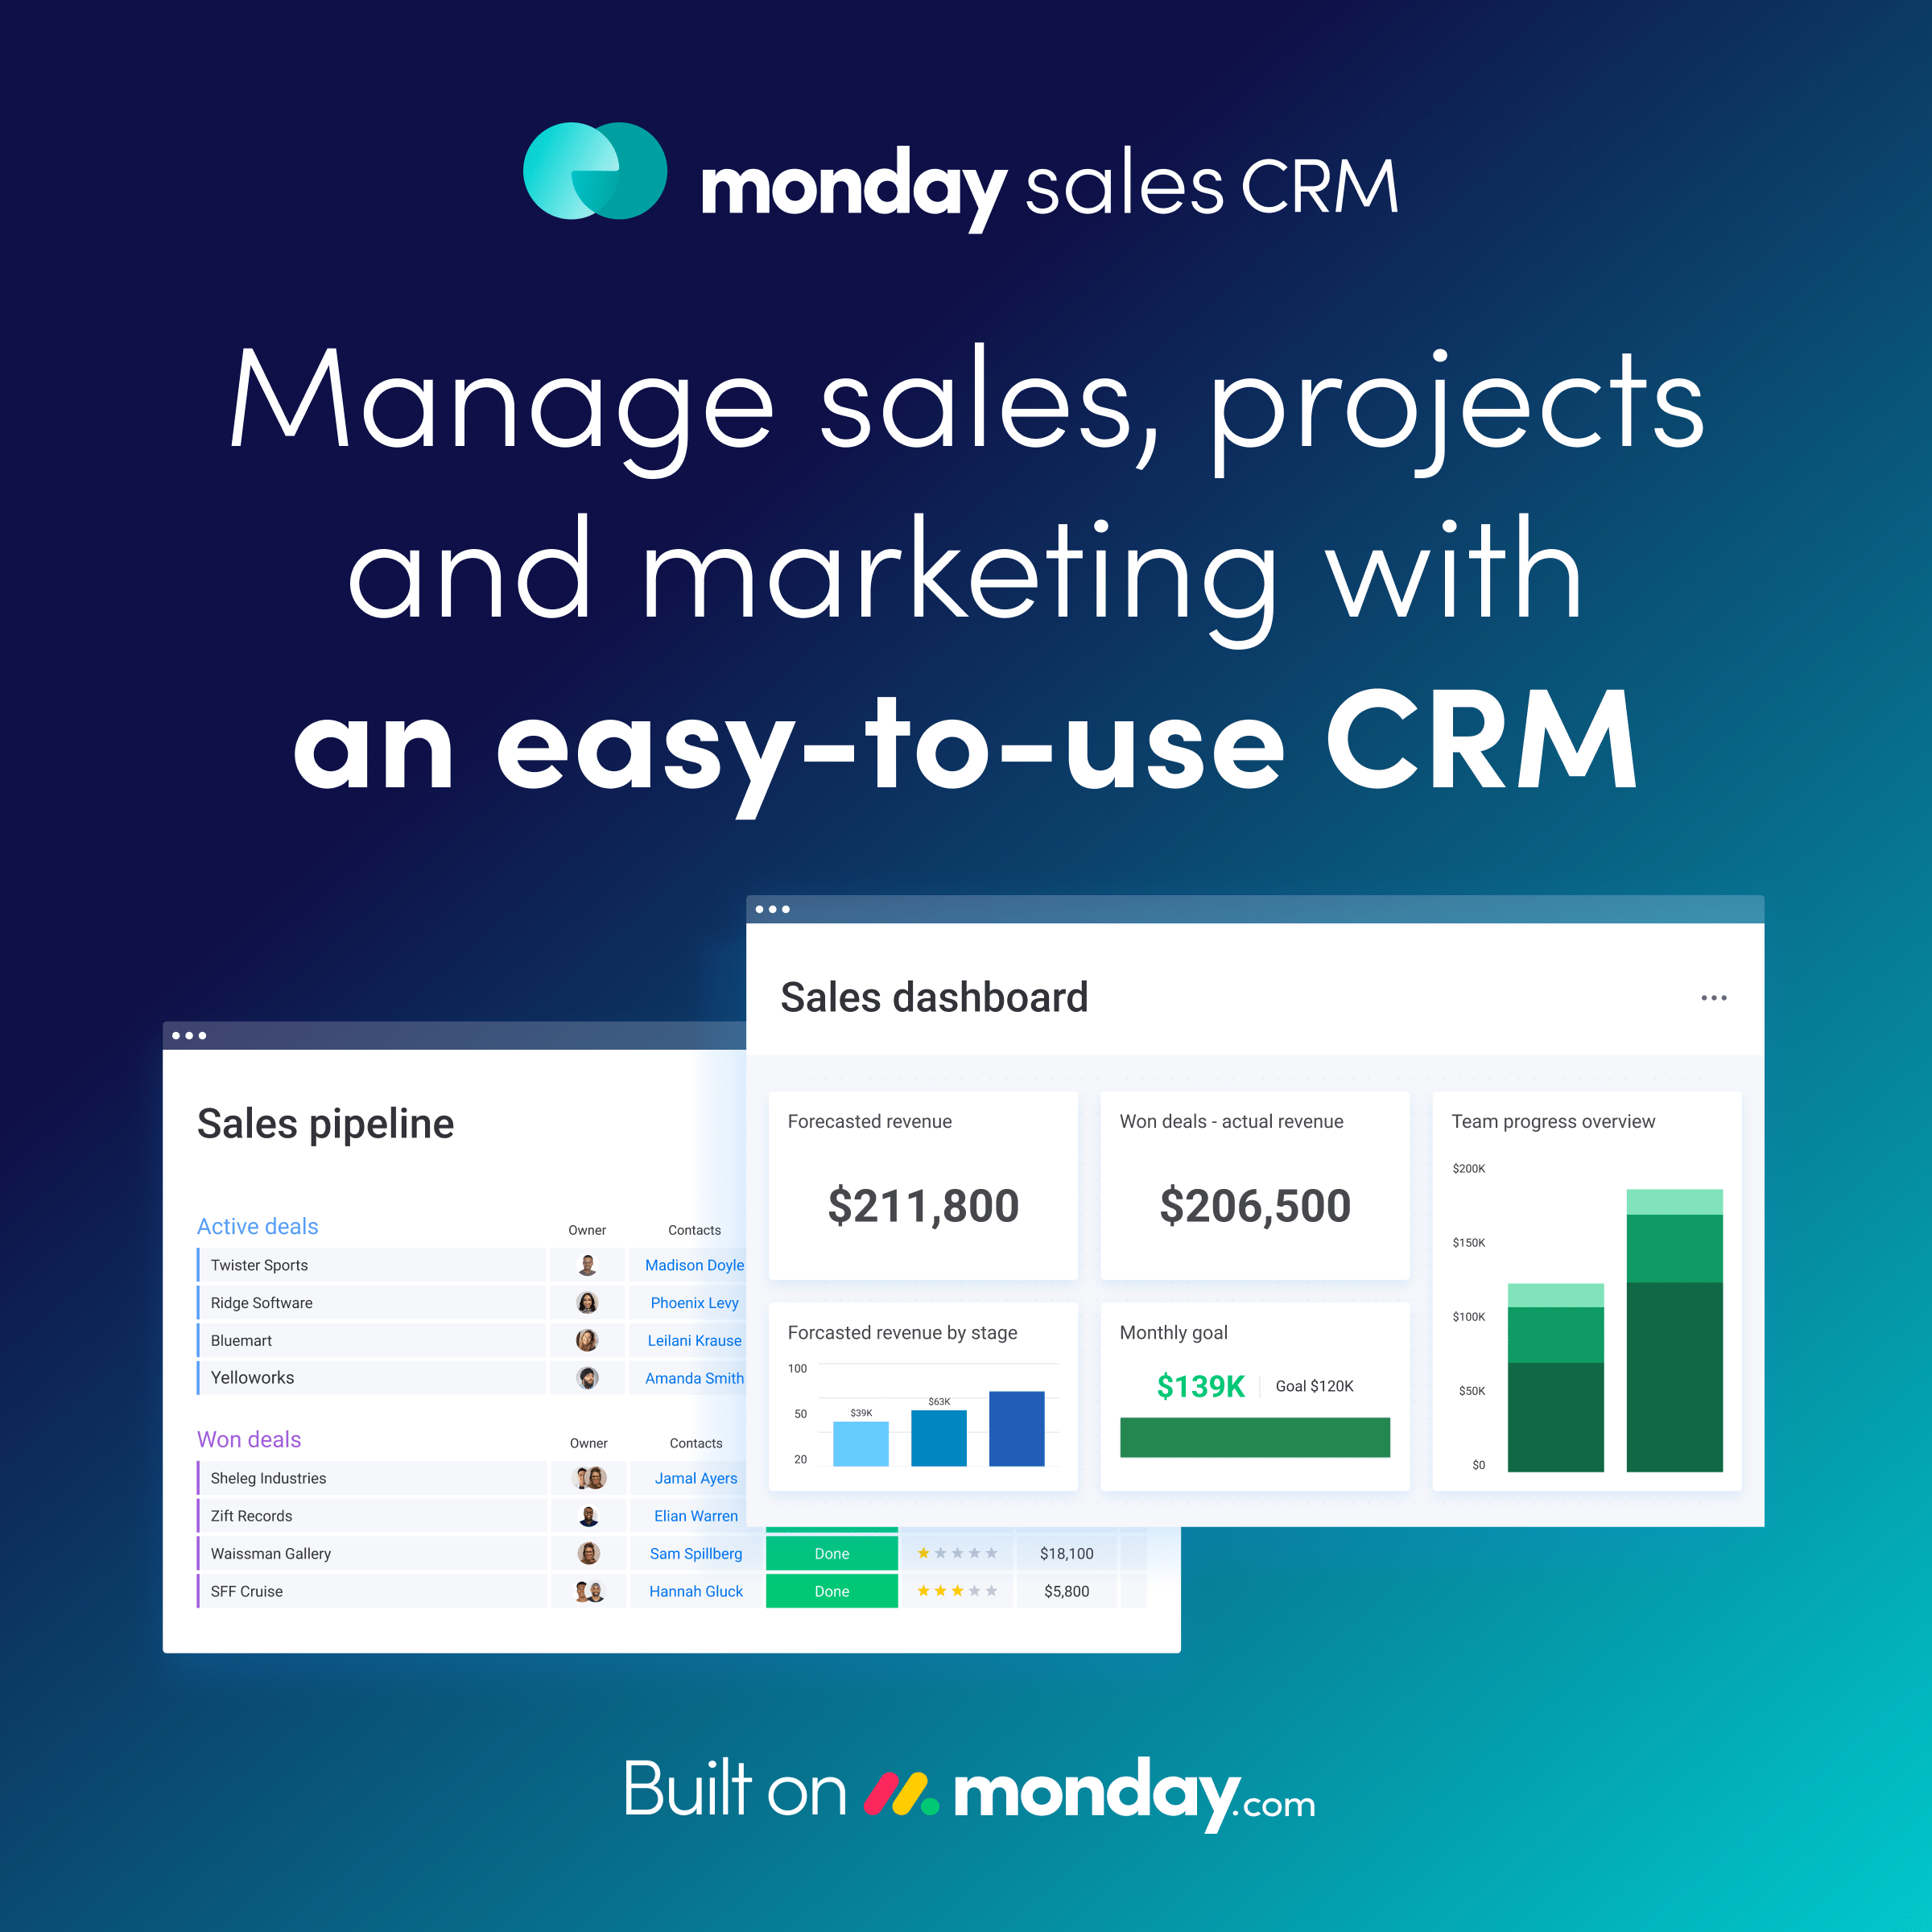 Features of Monday sales CRM.